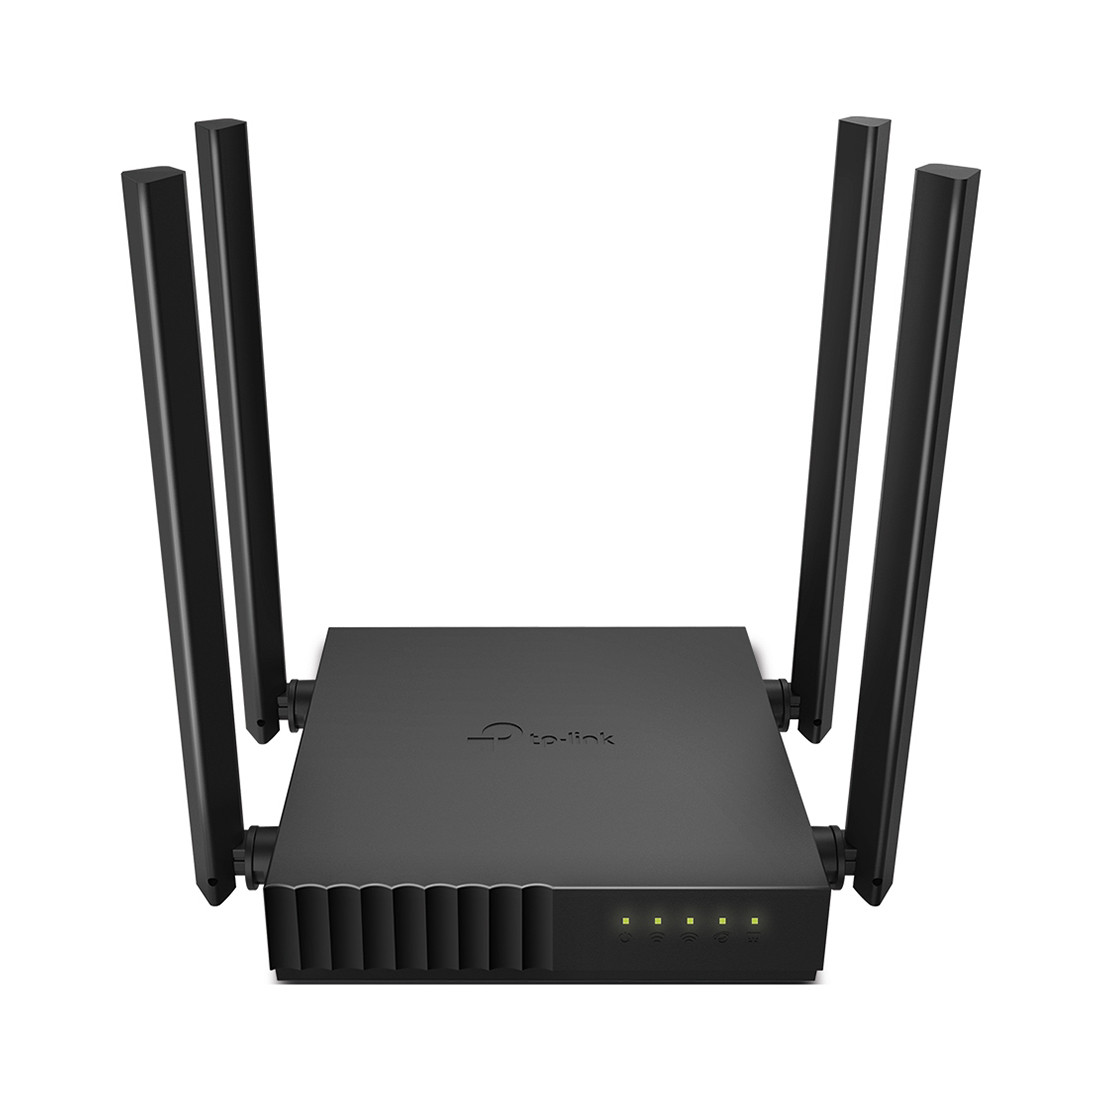 Маршрутизатор, TP-Link, Archer C54, 802.11a/b/g/n/ac, AC1200М, 22 MU-MIMO, 1 WAN порт 10/100М + 4 LAN порта - фото 2 - id-p113446882